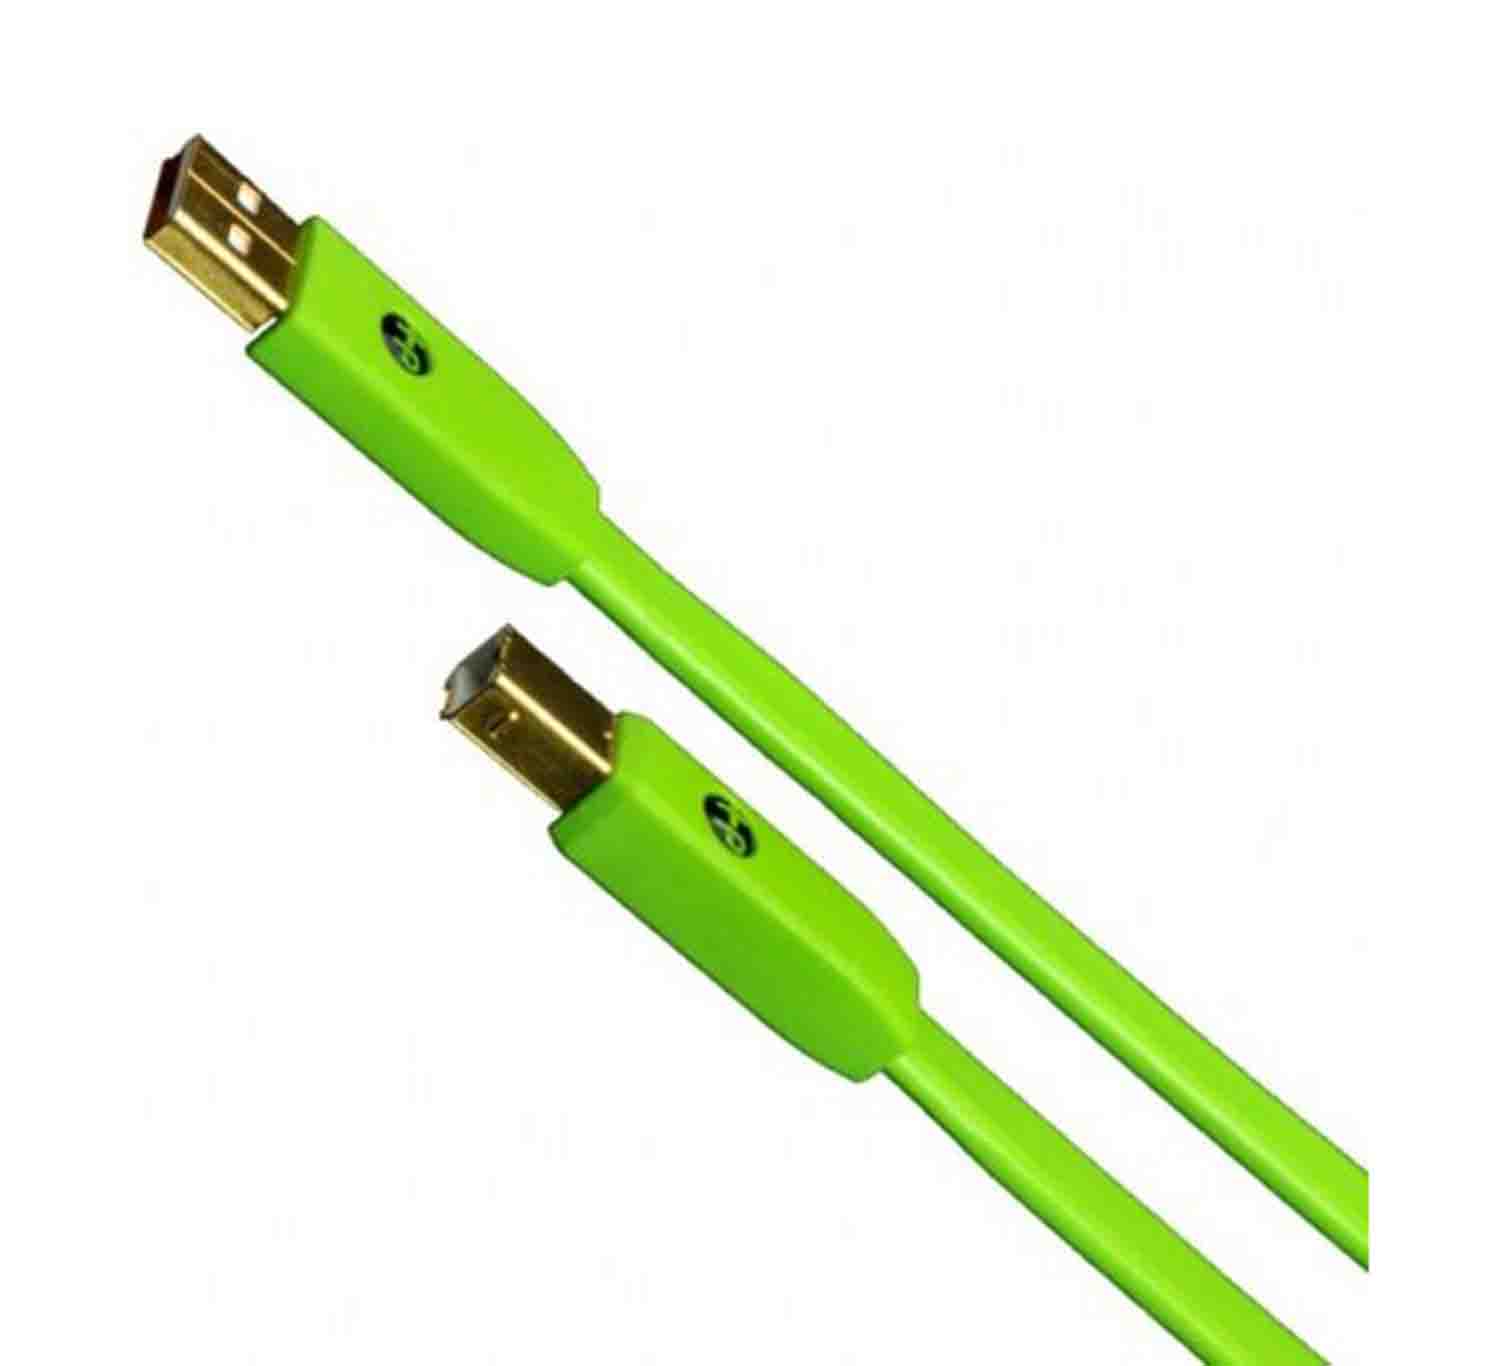 Oyaide Neo d+ USB 2.0 Class B Cable 5M - Hollywood DJ